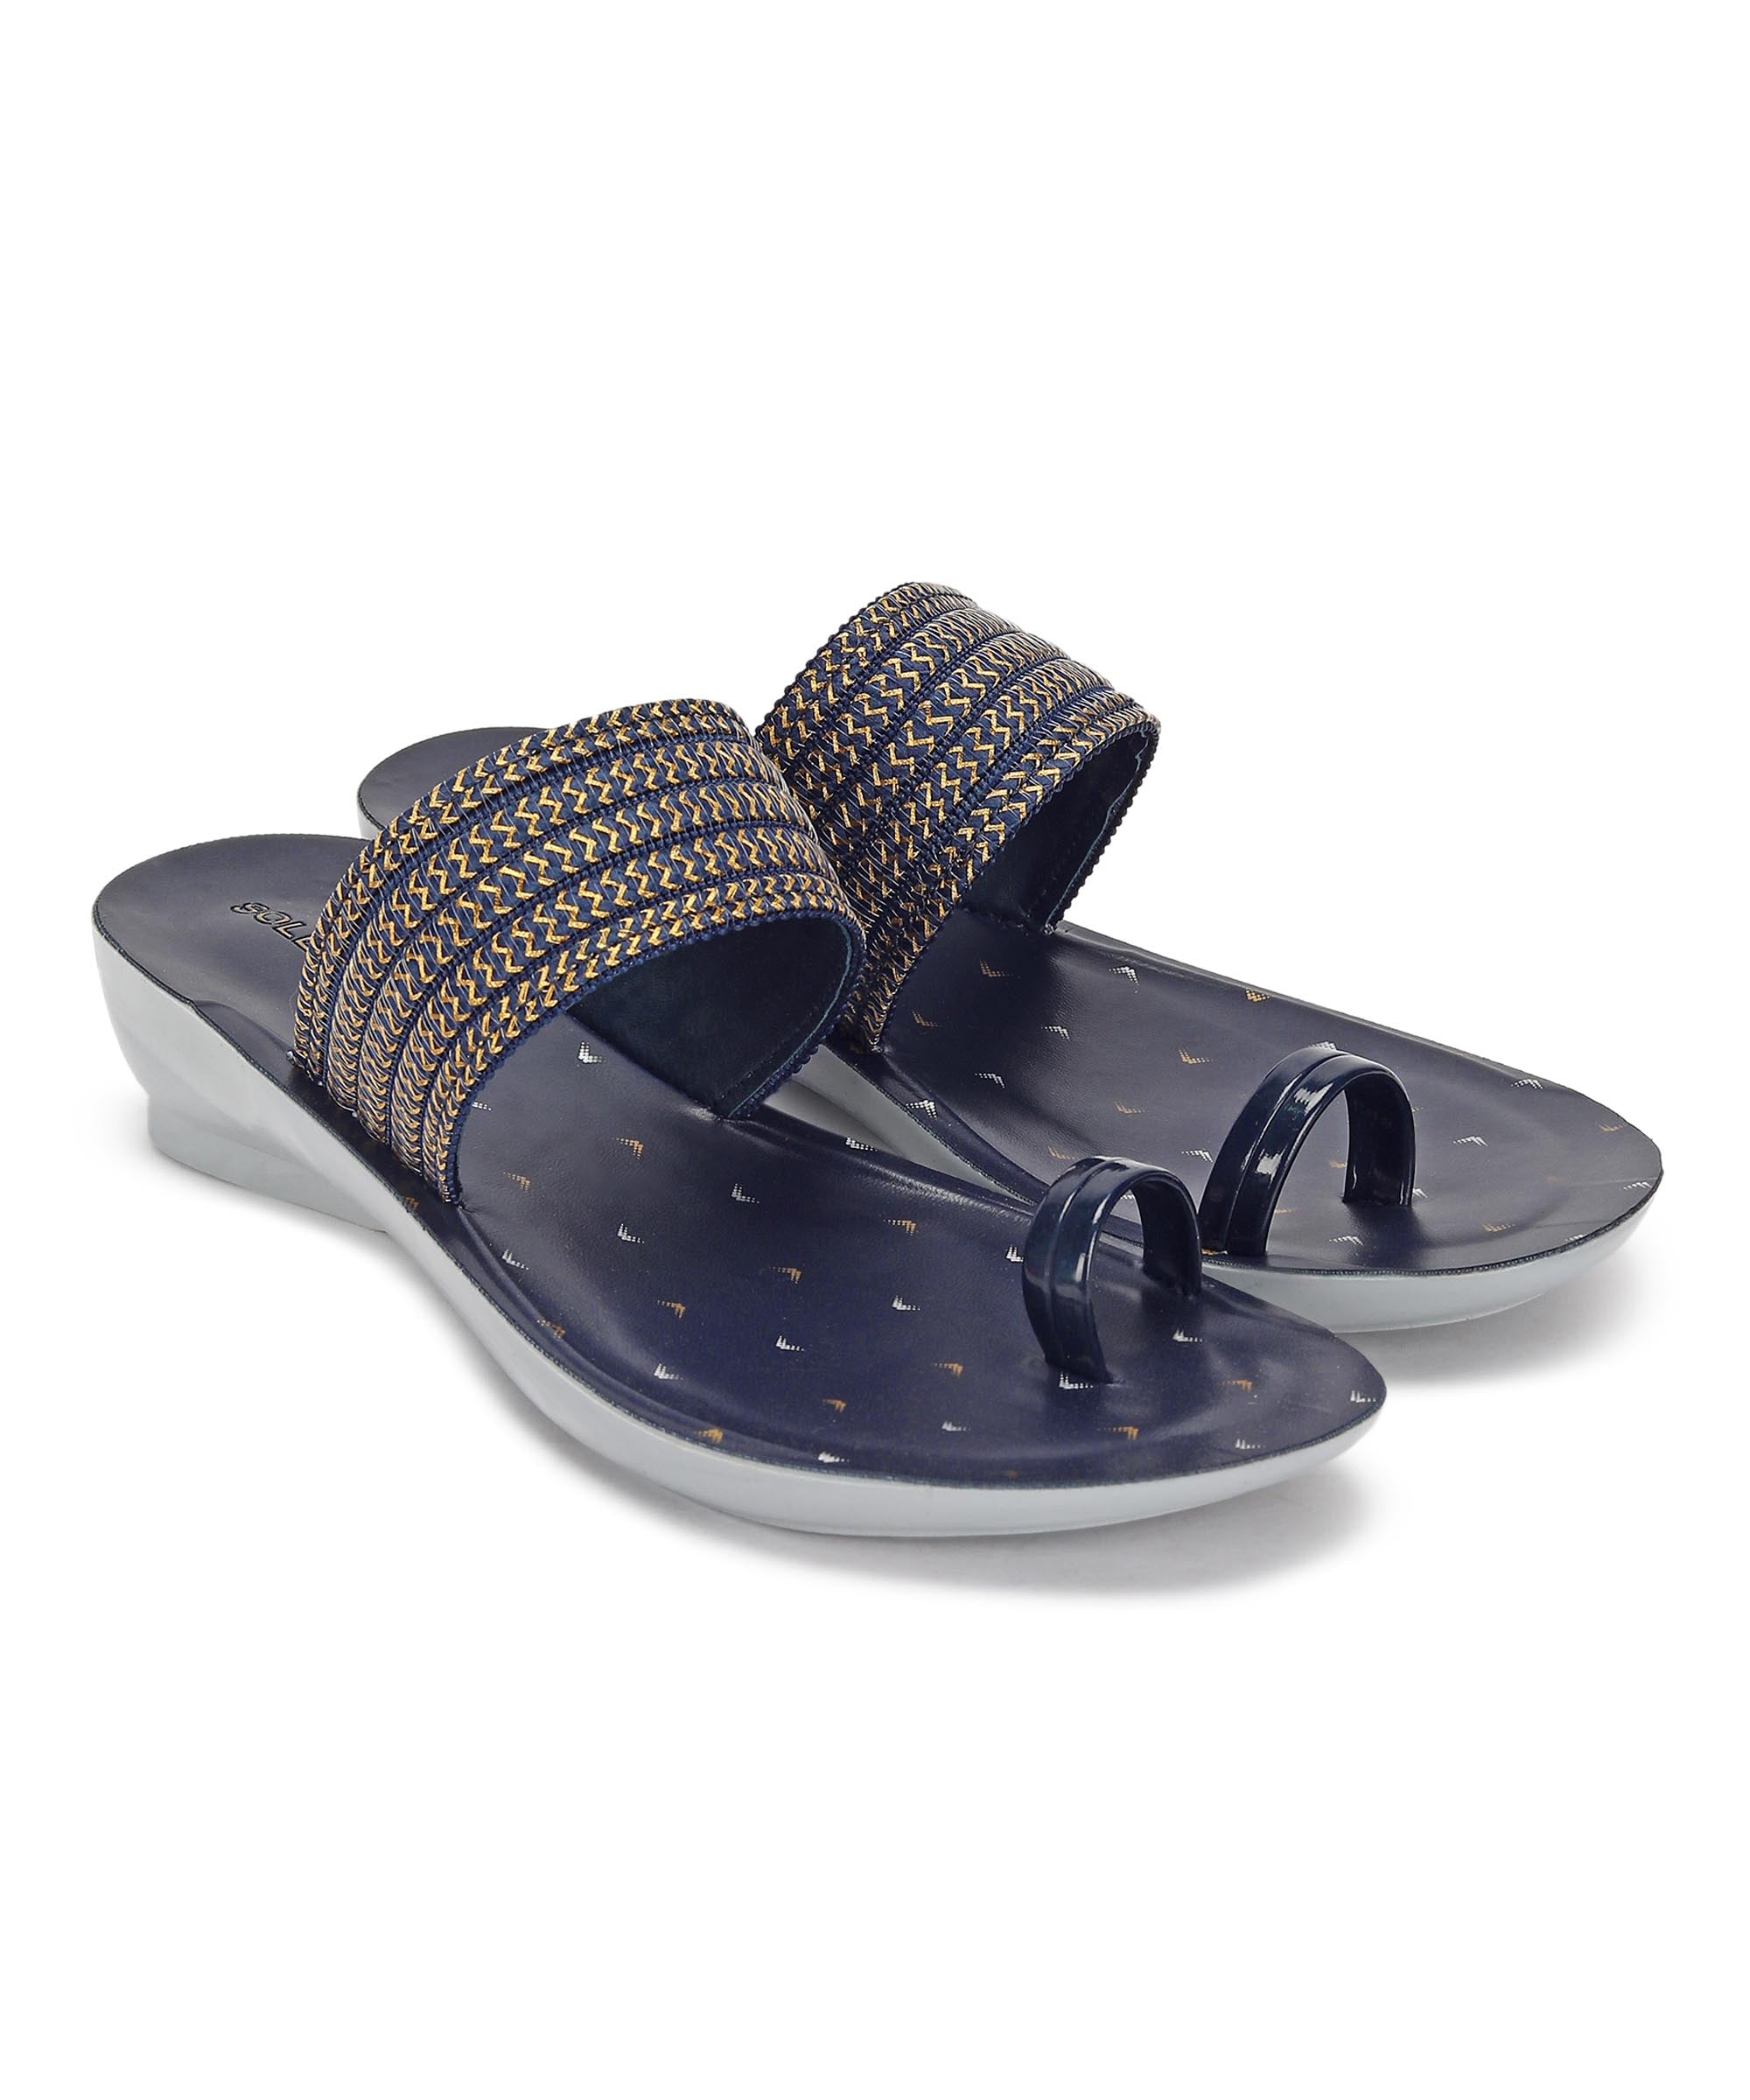 Paragon PUK7014L Women Sandals | Casual &amp; Formal Sandals | Stylish, Comfortable &amp; Durable | For Daily &amp; Occasion Wear